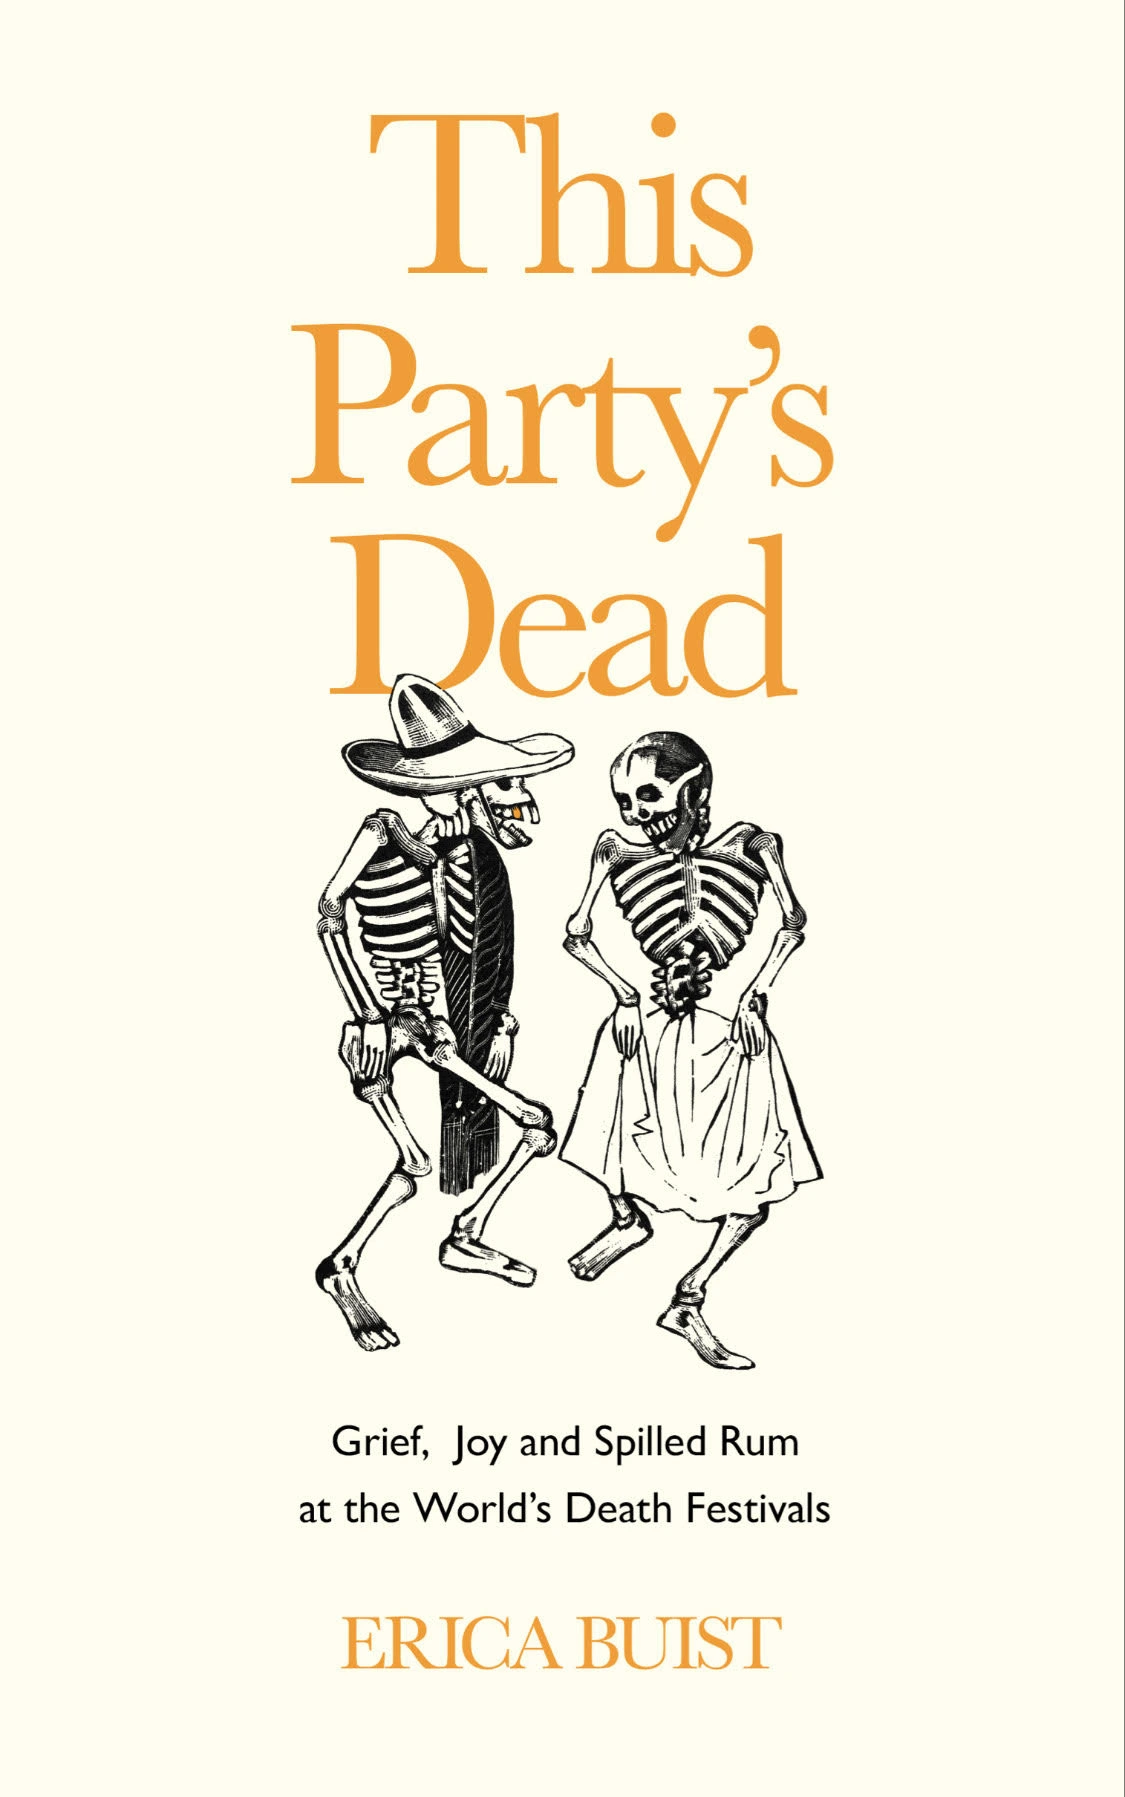 Excerpt: Erica Buist’s THIS PARTY’S DEAD